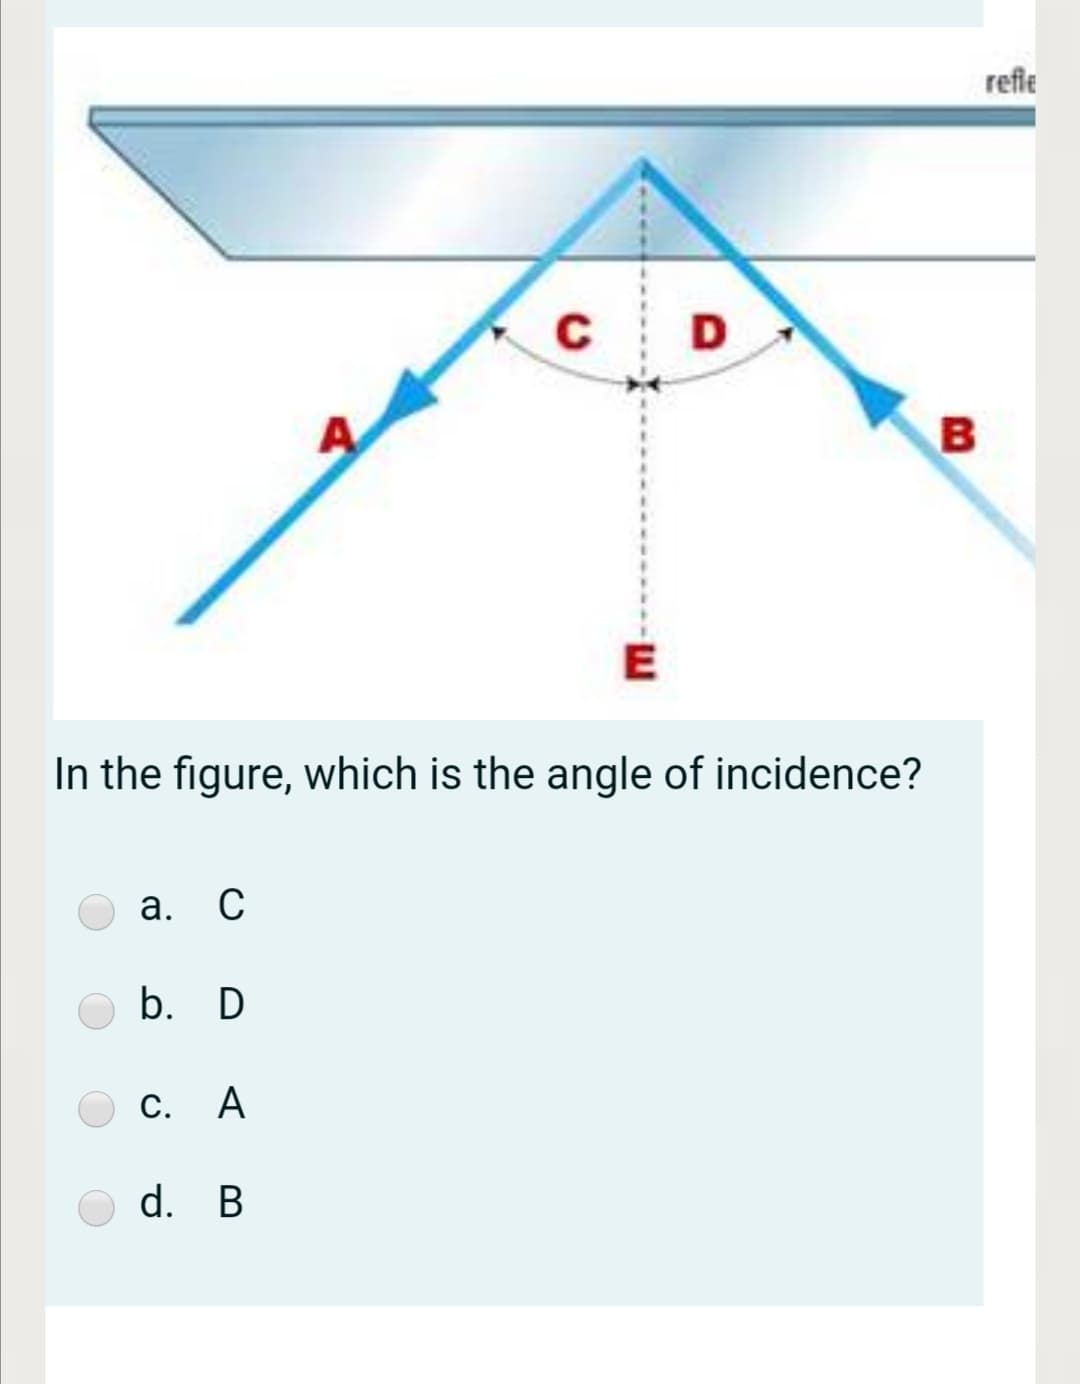 refle
C
E
In the figure, which is the angle of incidence?
а.
C
b. D
С. А
d. B
